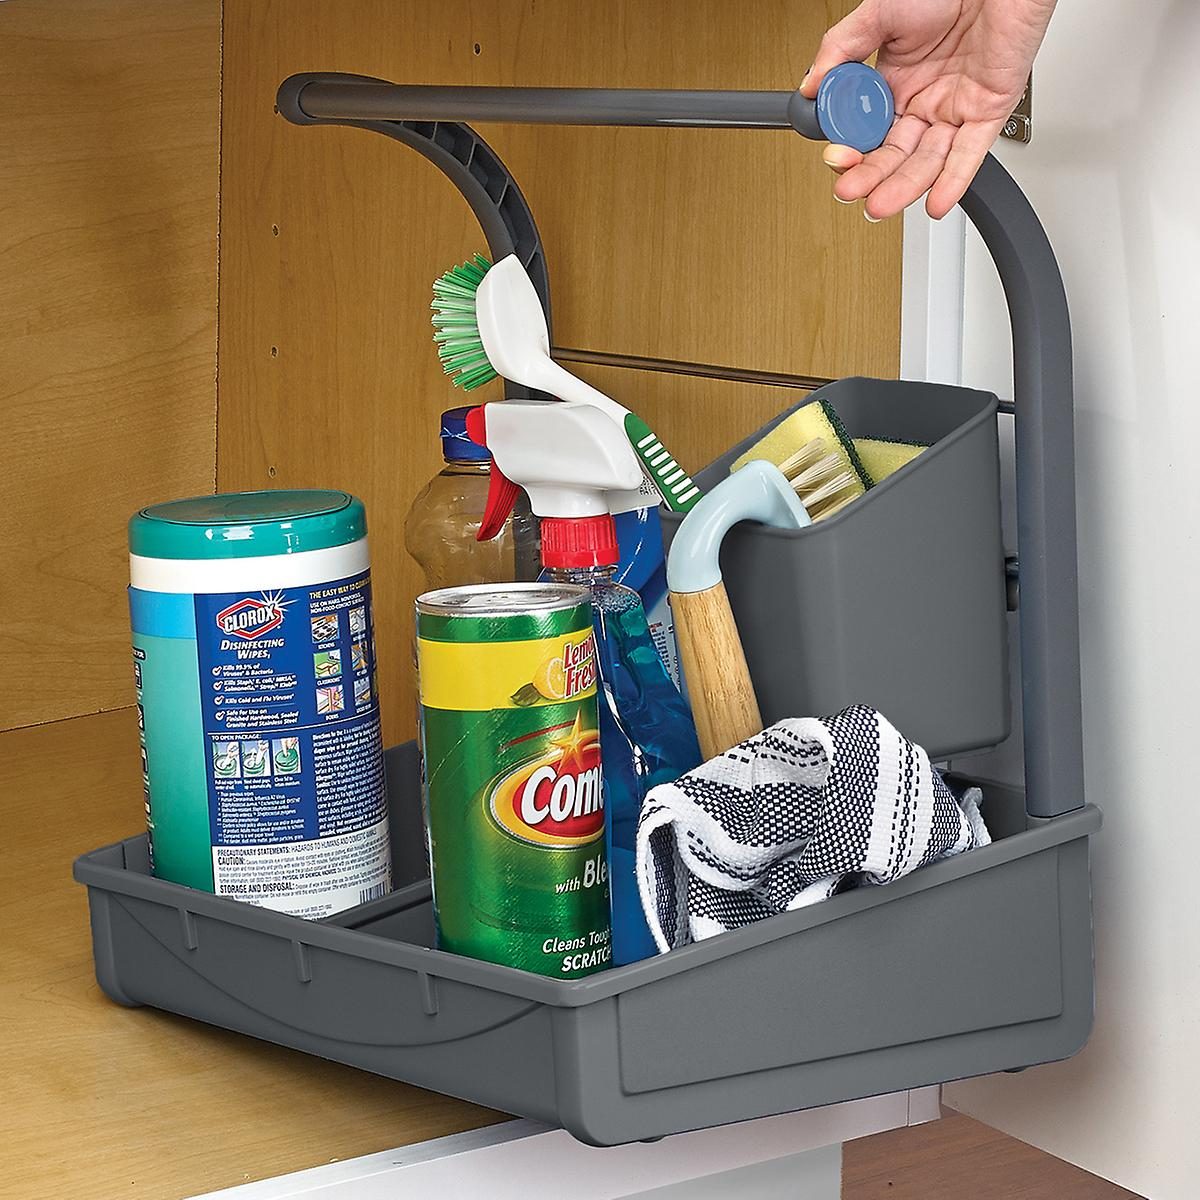 https://www.tasteofhome.com/wp-content/uploads/2020/03/Polder-Under-The-Sink-Storage-Caddy-ecomm-via-containerstore.com_.jpg?fit=700%2C700